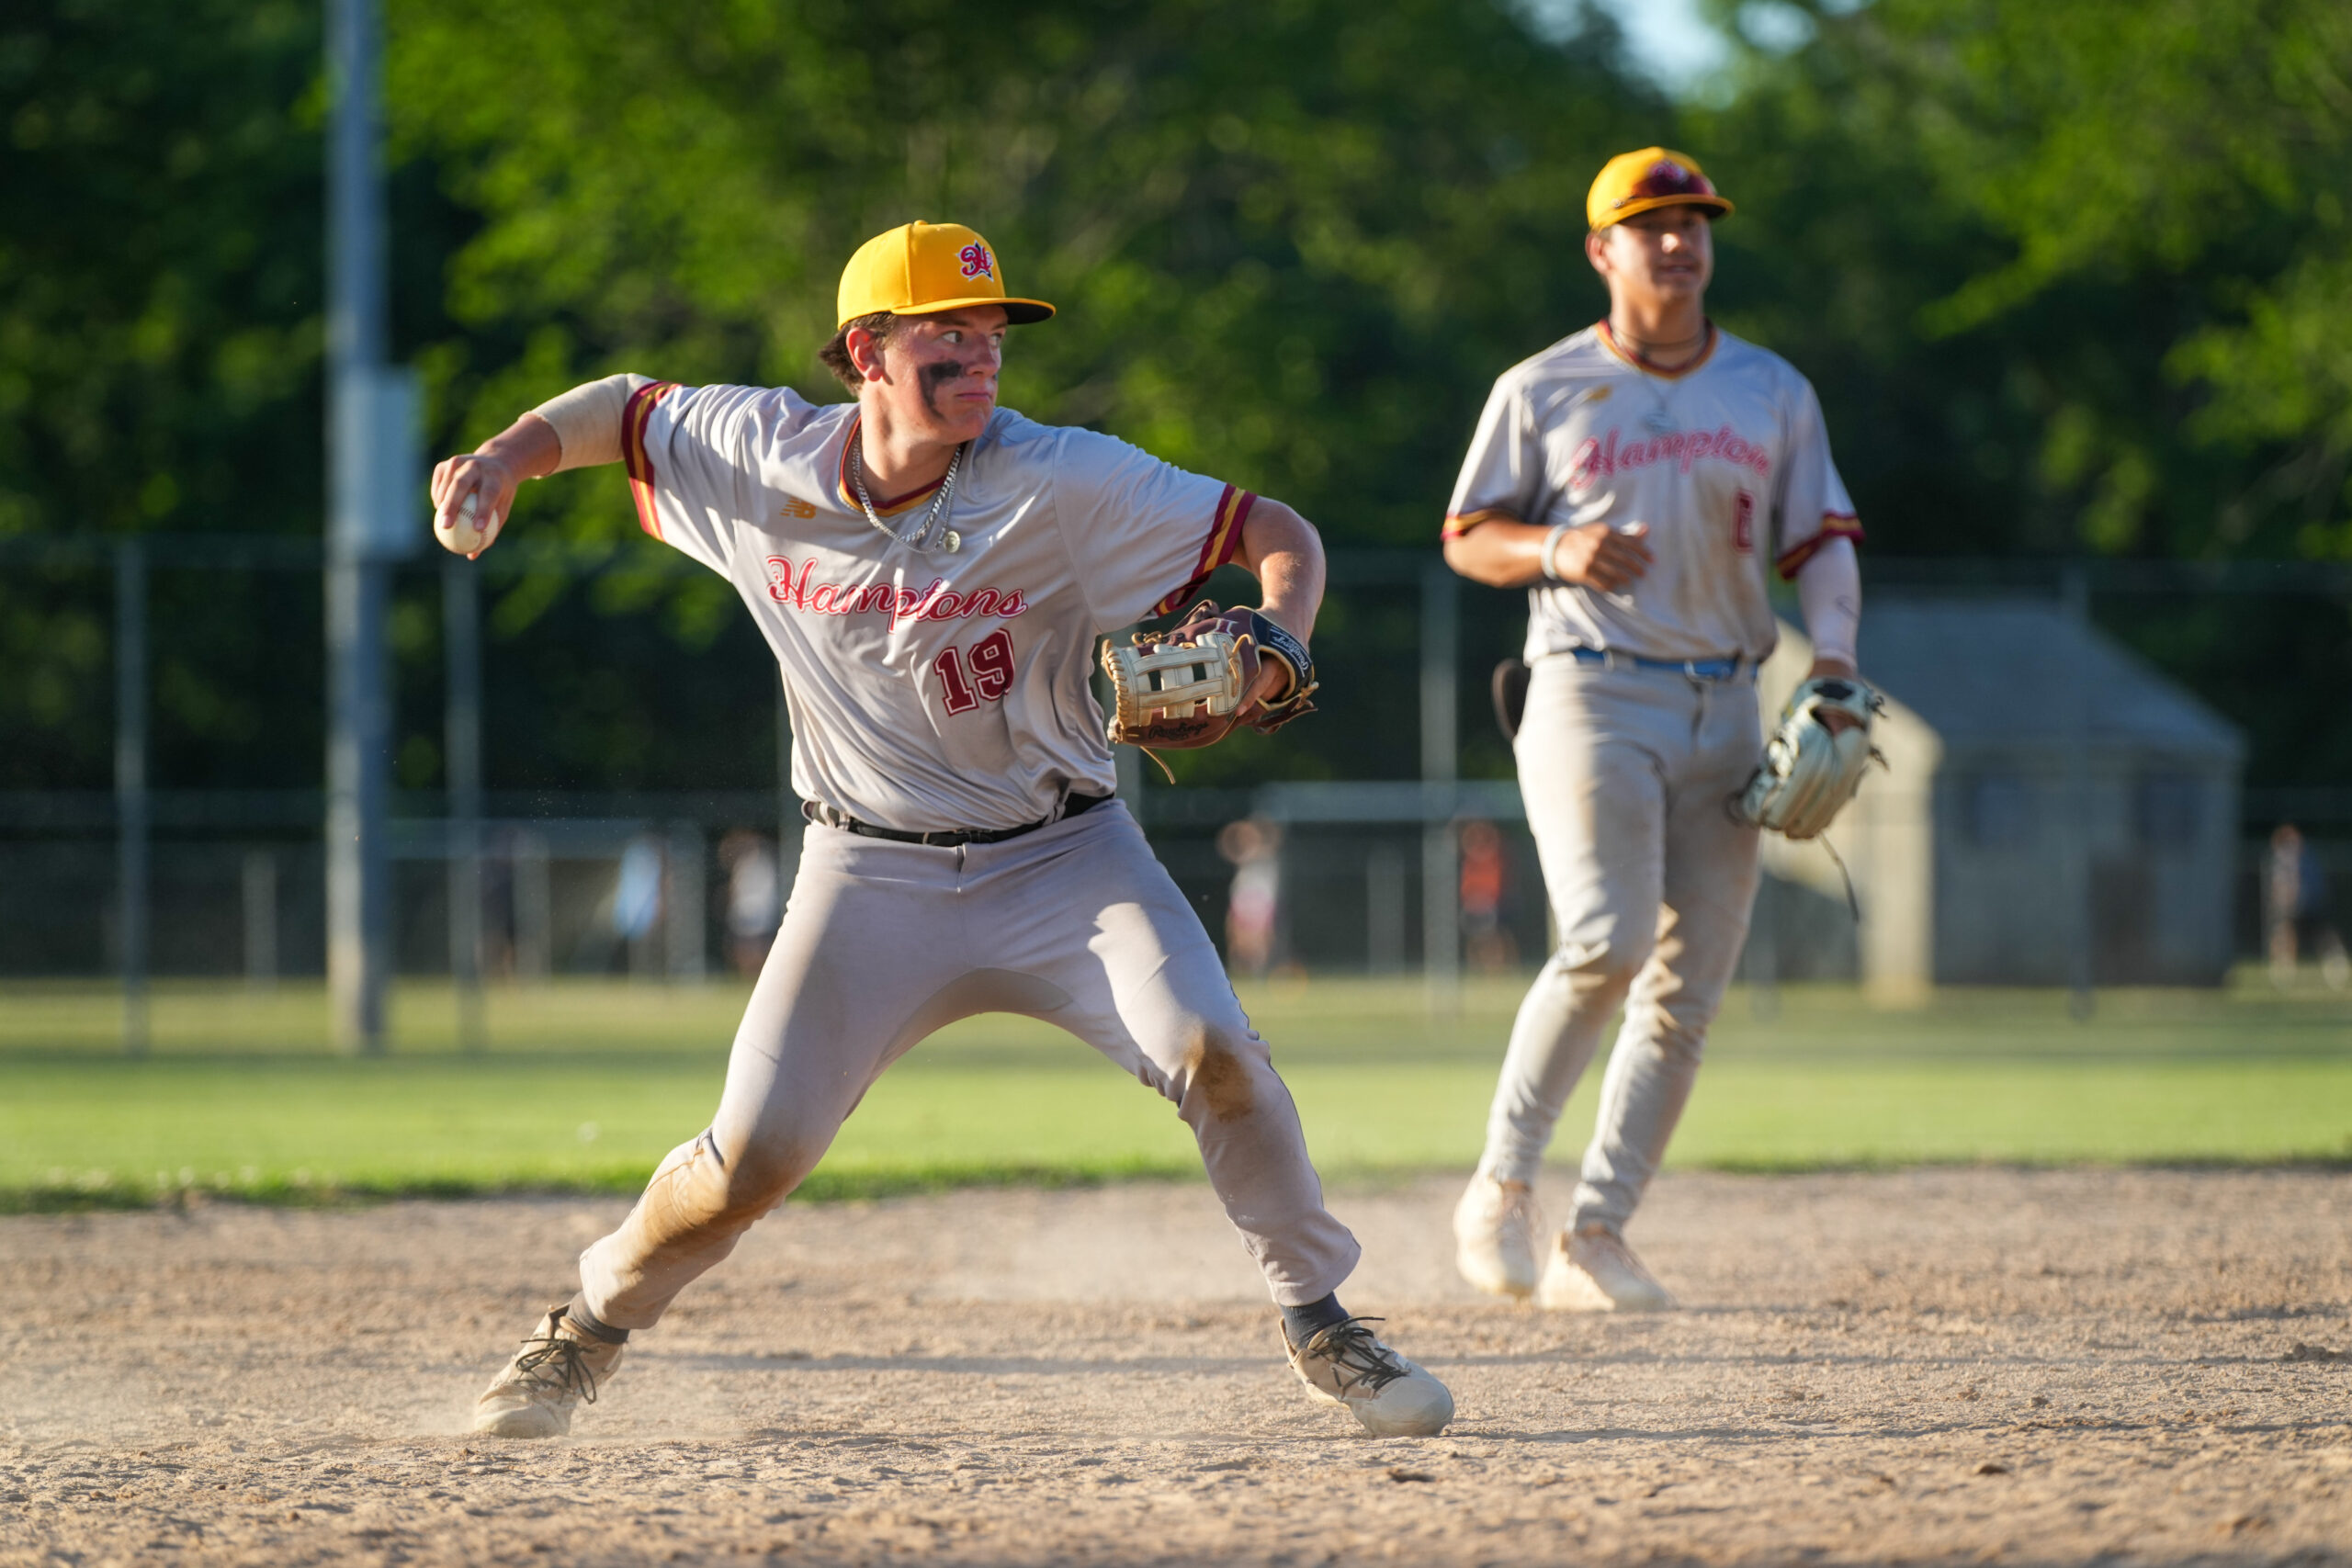 Gold Team All-Star Matt Shuhet (North Fork/Iona) looks to throw to first base after fielding a ground ball.  RON ESPOSITO